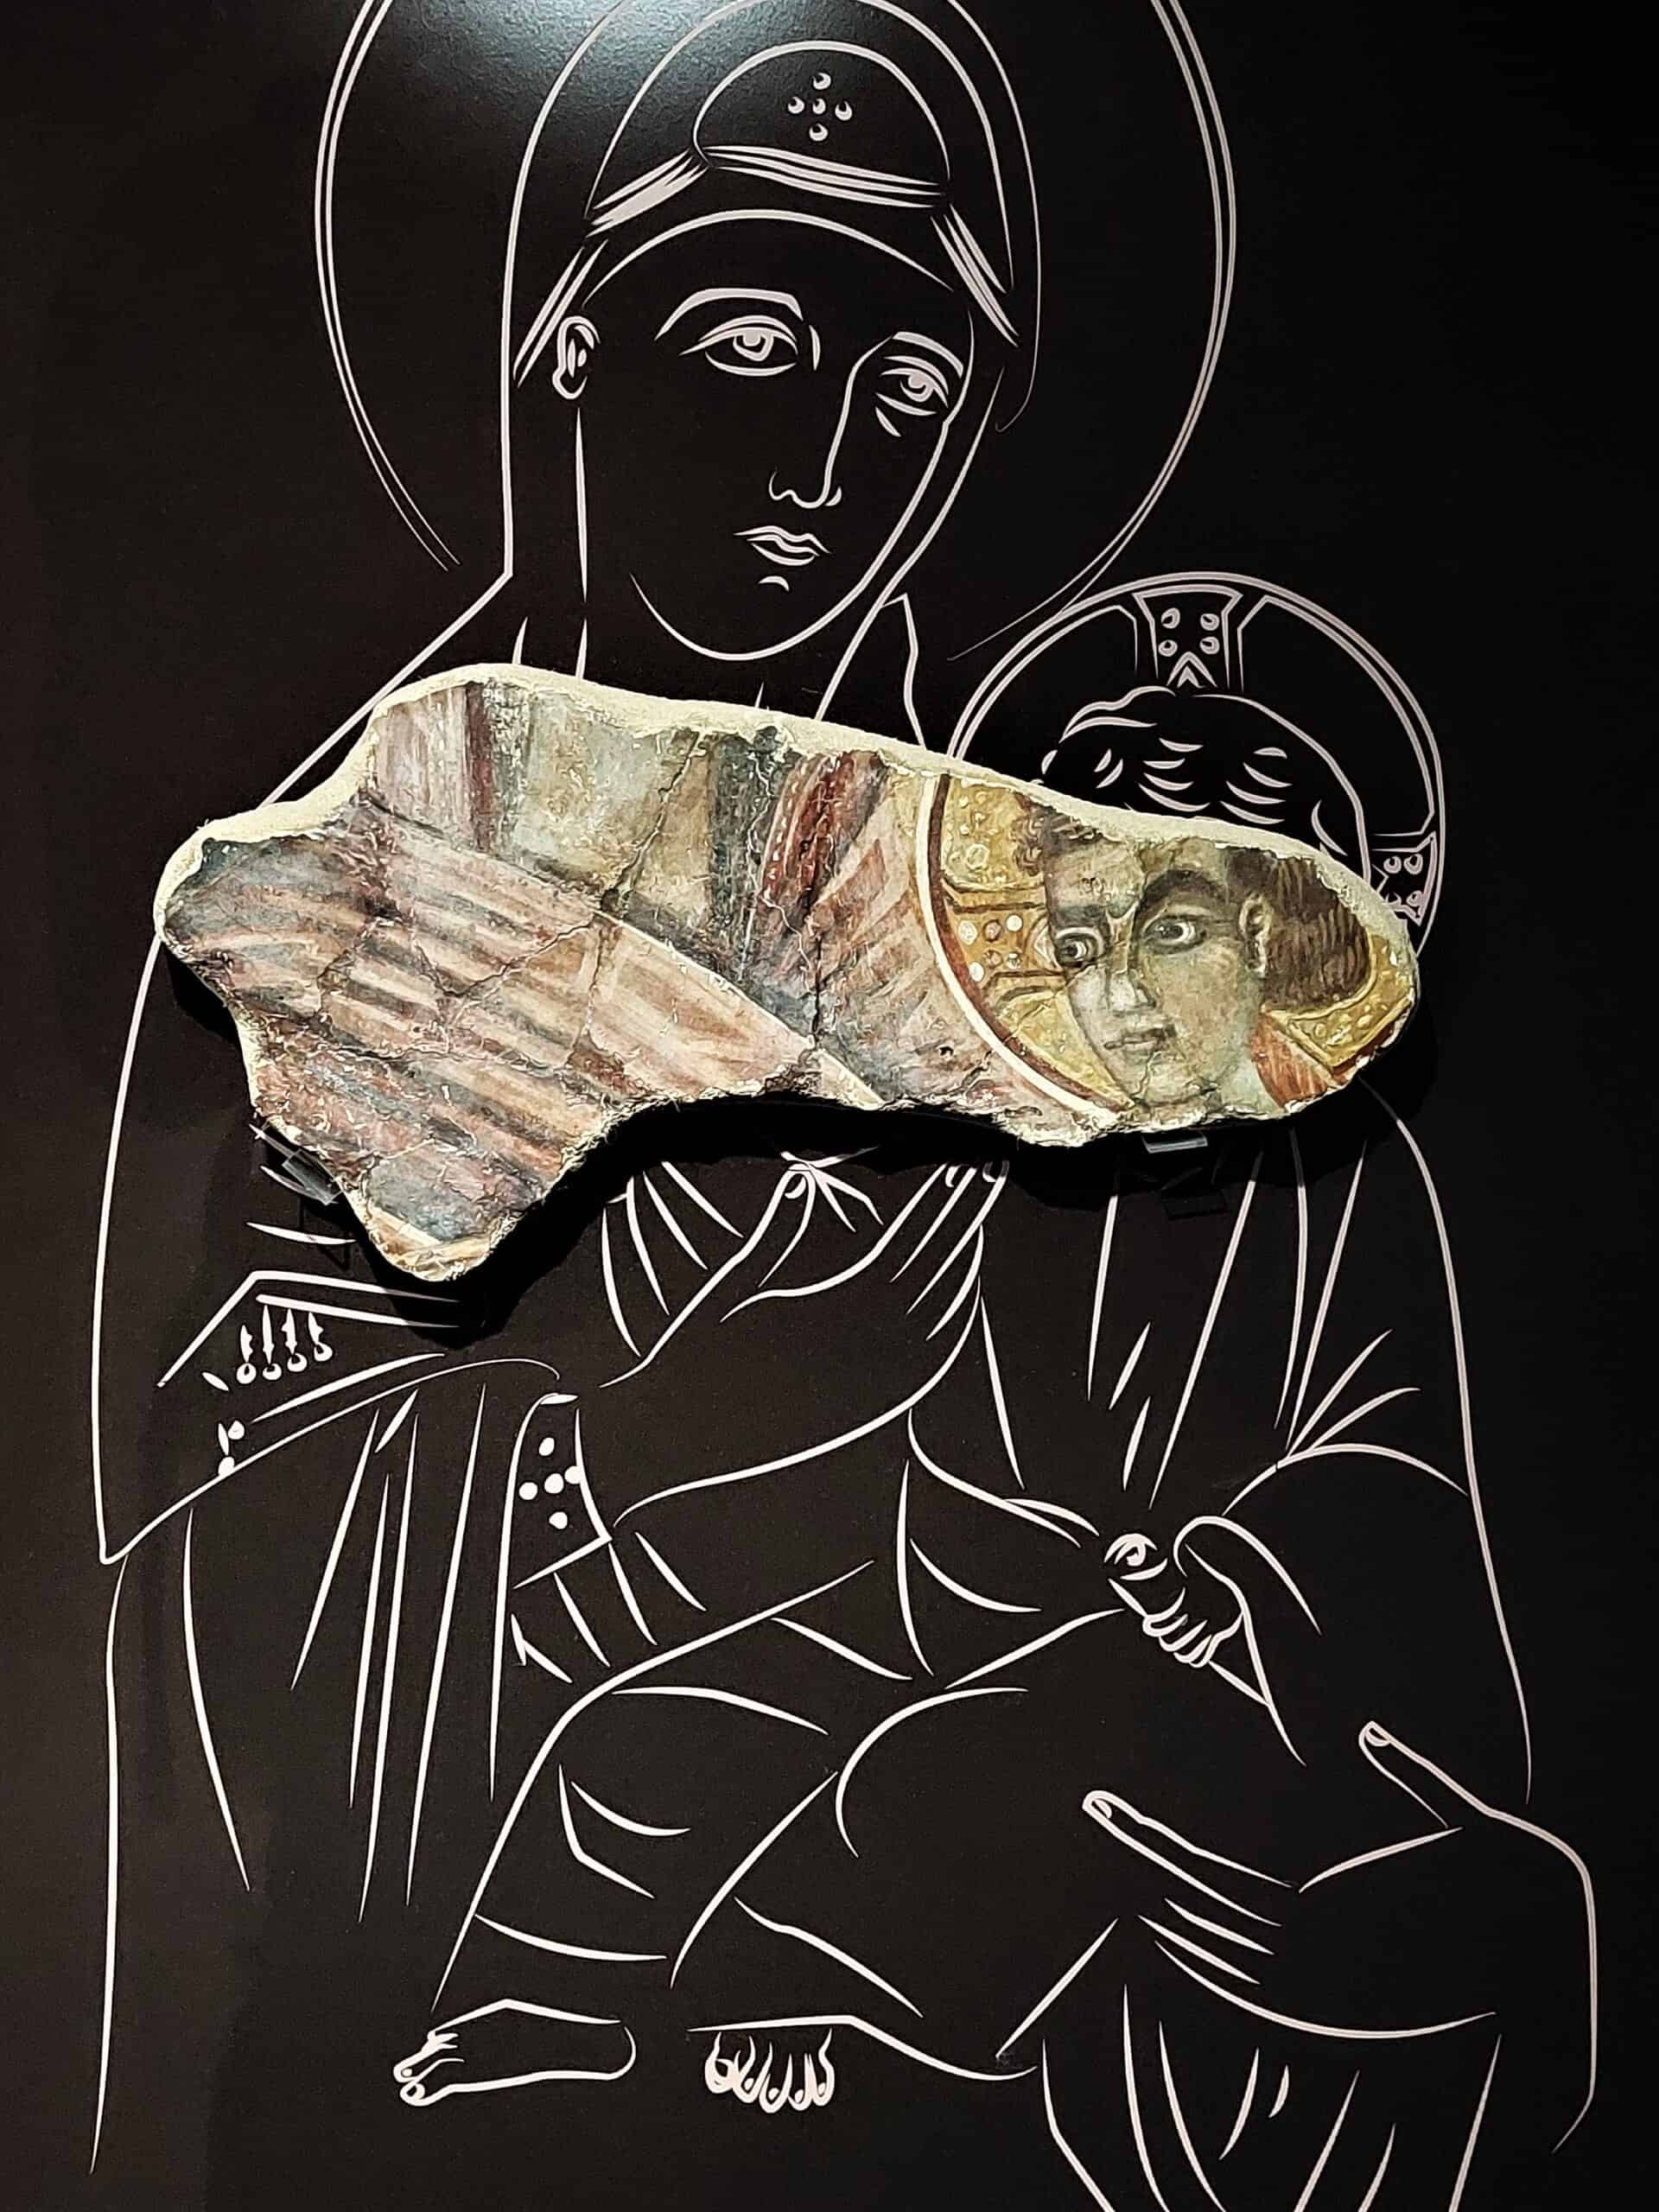 pieces of a religious wall fresco, showing a woman and a child, complemented by the stylized drawing of the missing parts, Argos, Greece